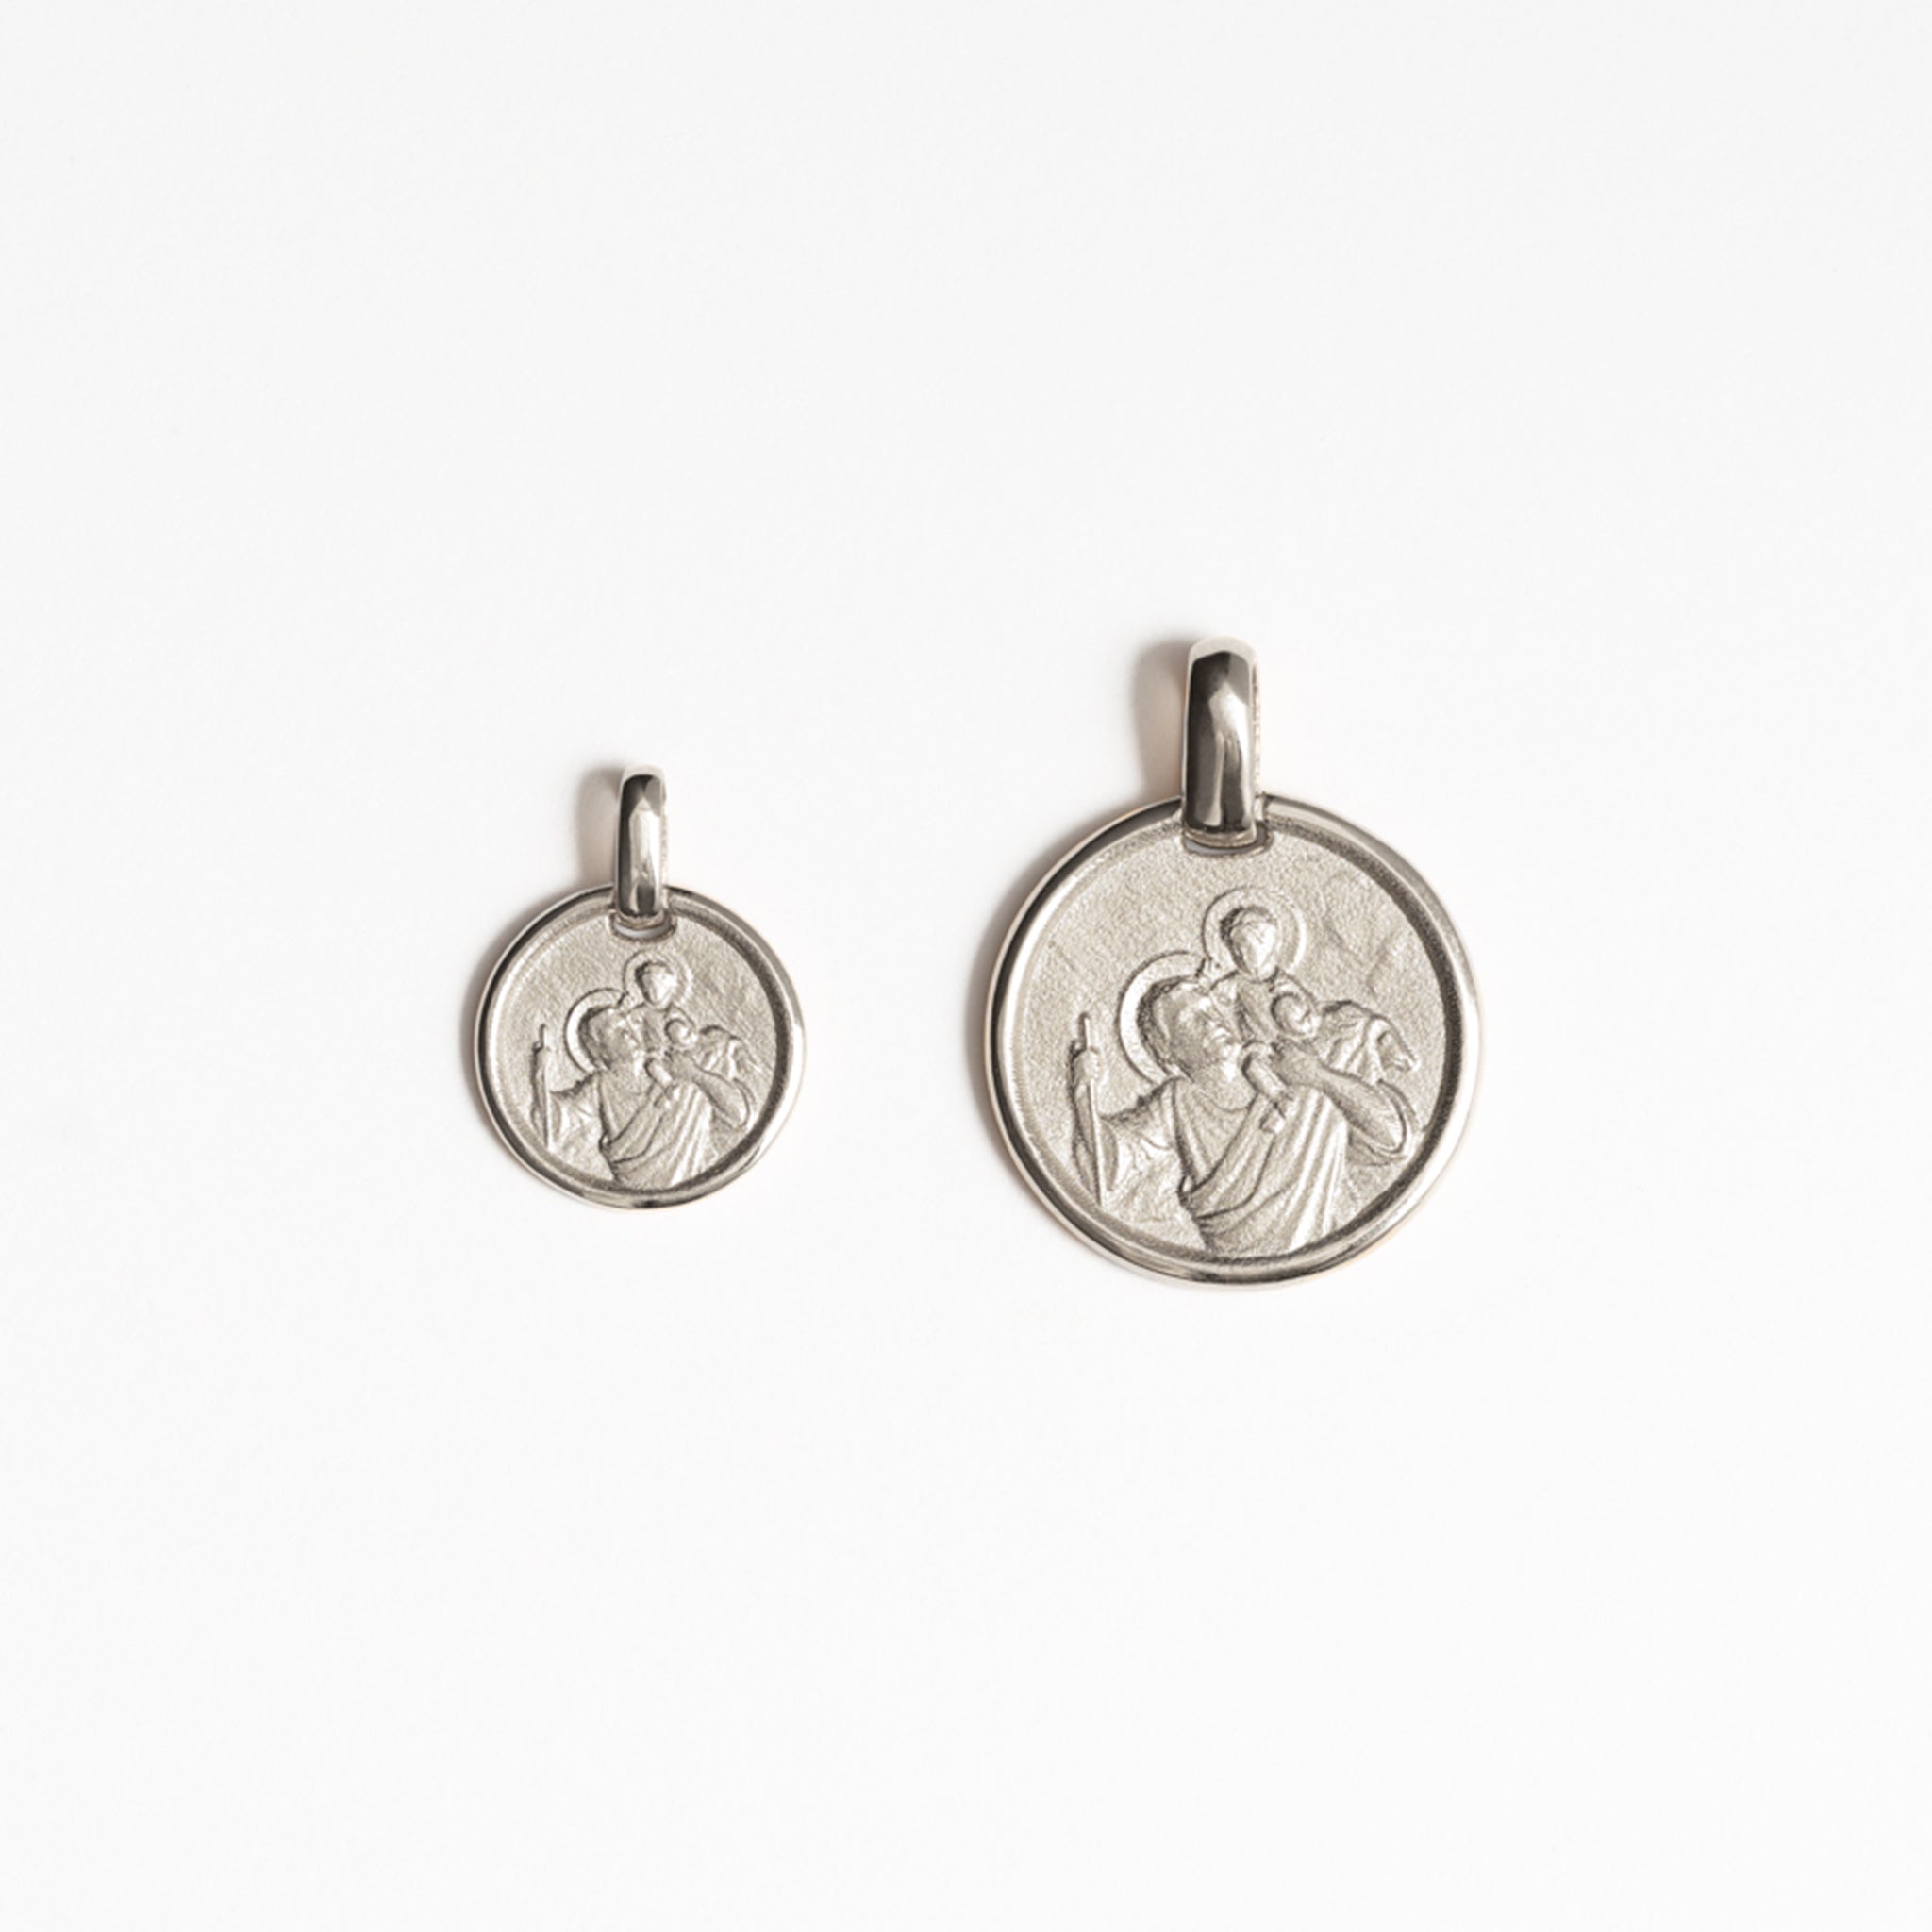 The Small St. Christopher Medallion